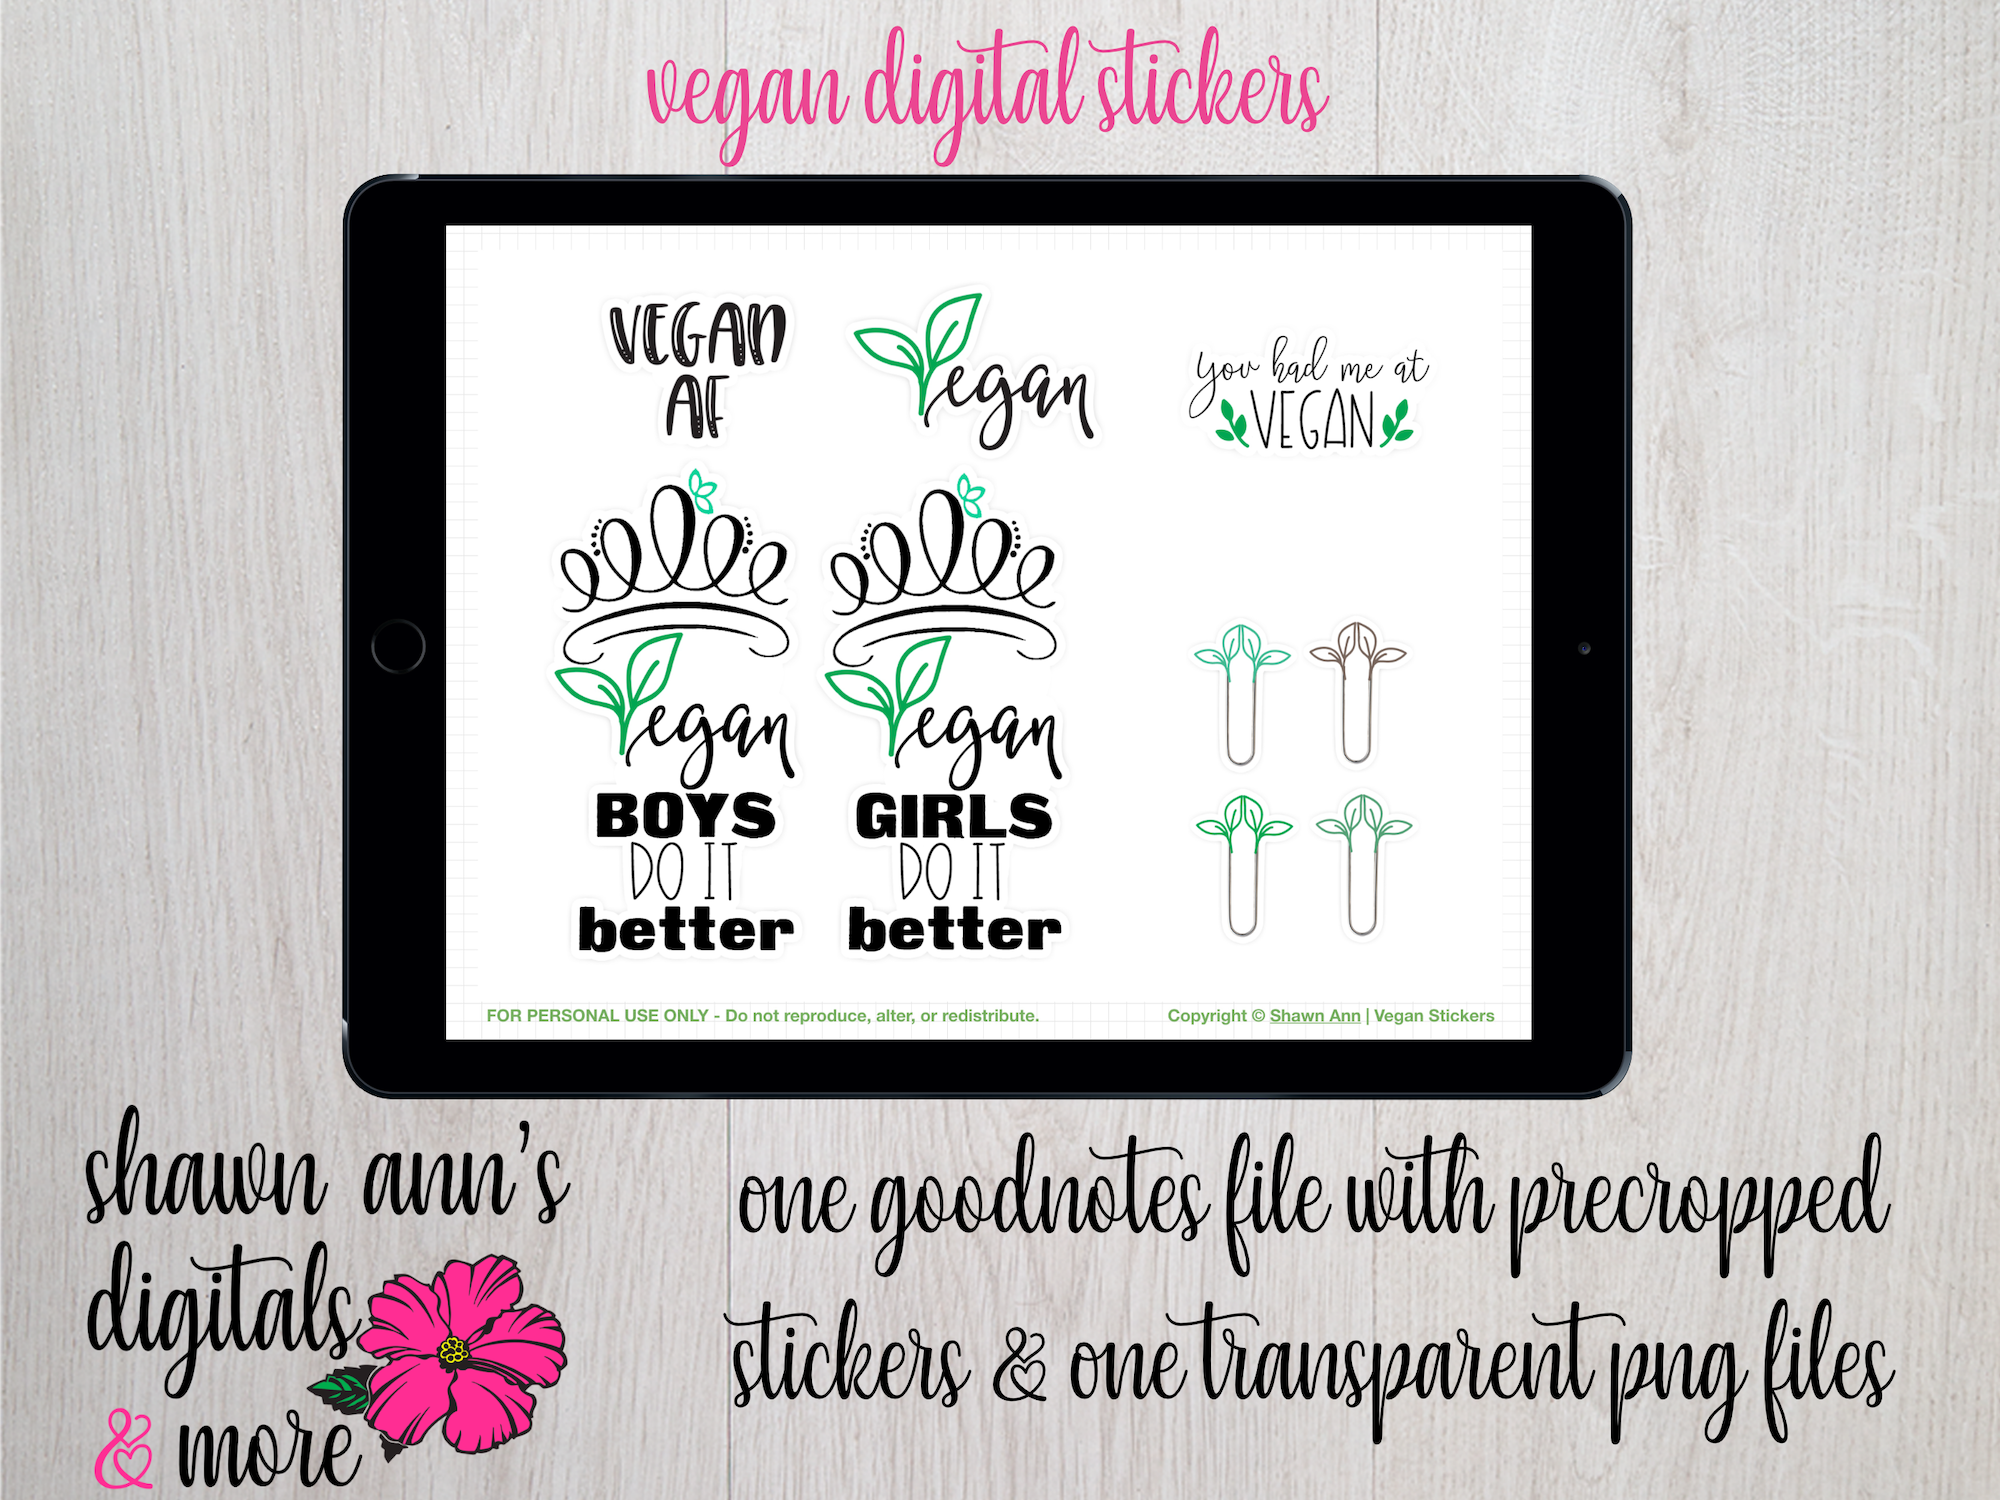 Vegan Digital Stickers | GoodNotes, iPad and Android - Stickers Page 2